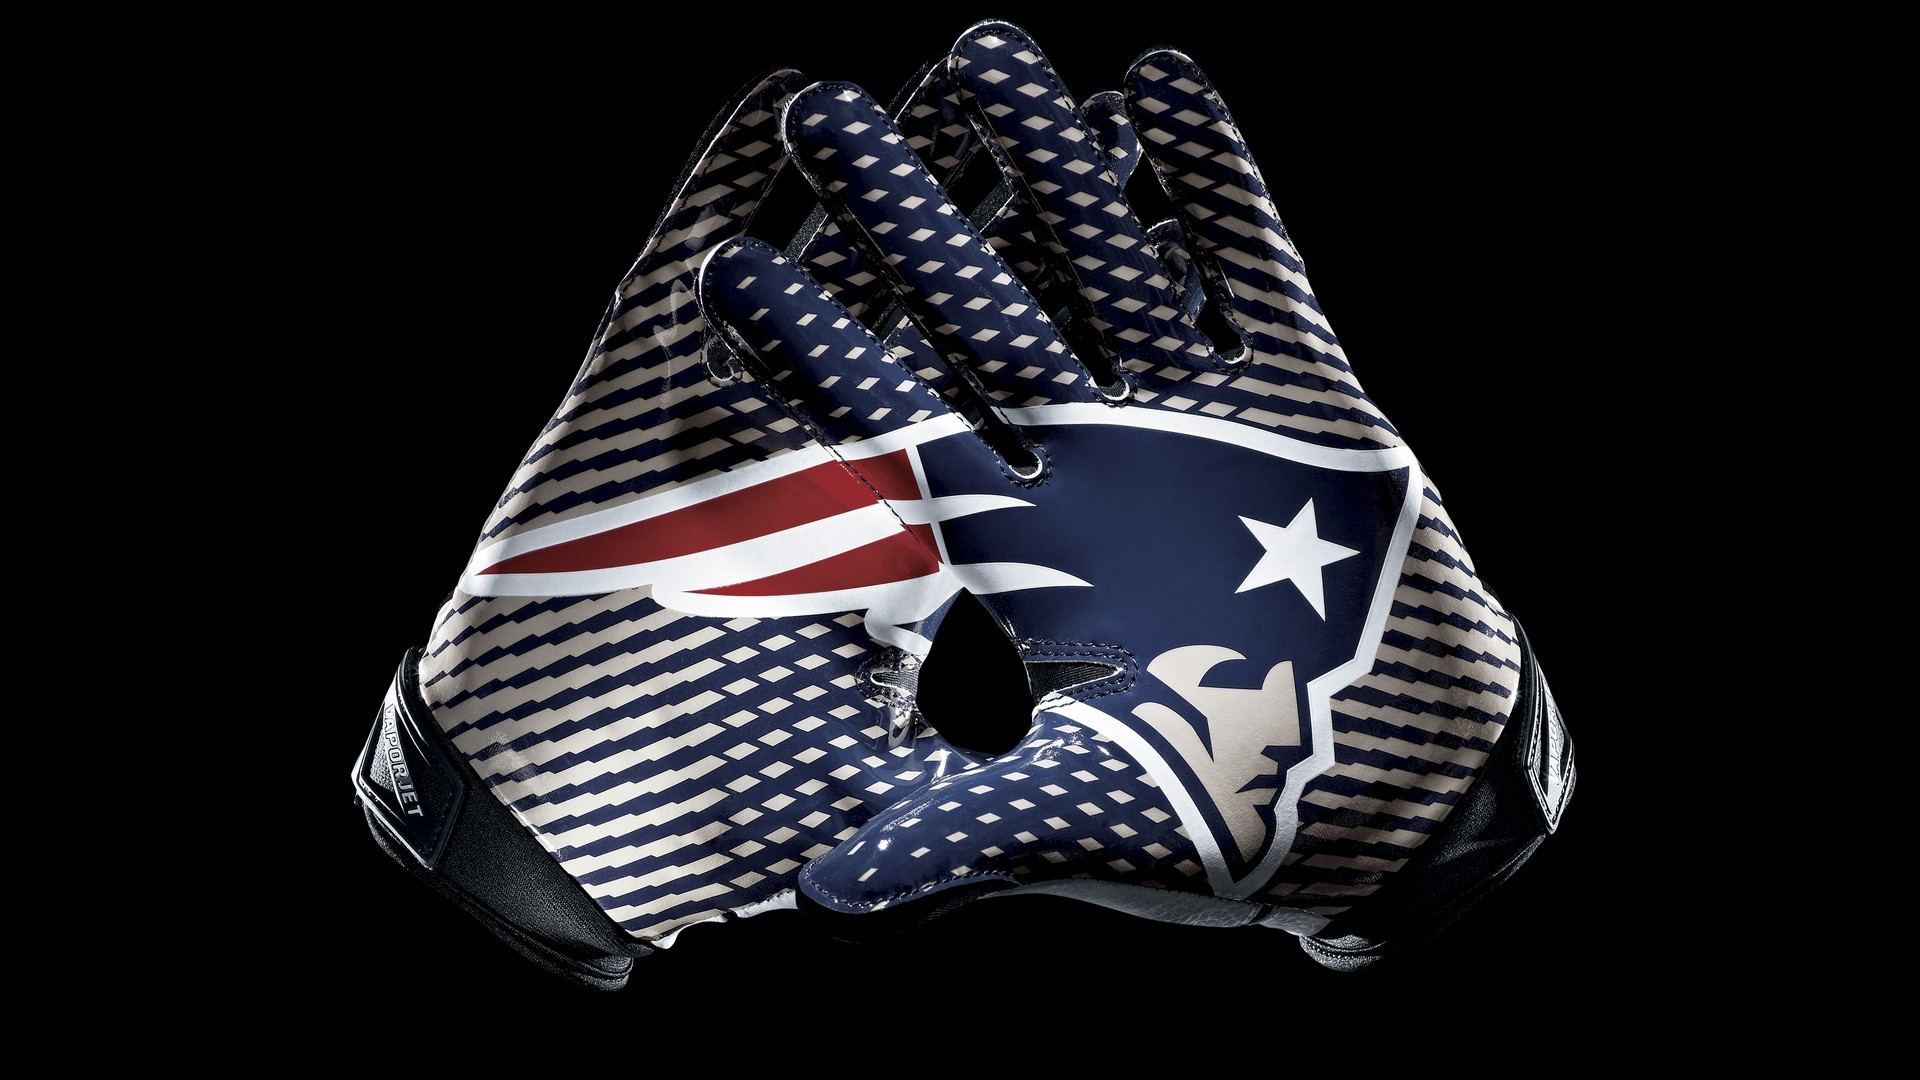 1920x1080 New England Patriots Wallpaper For Mac Backgrounds with resolution   pixel. You can make this